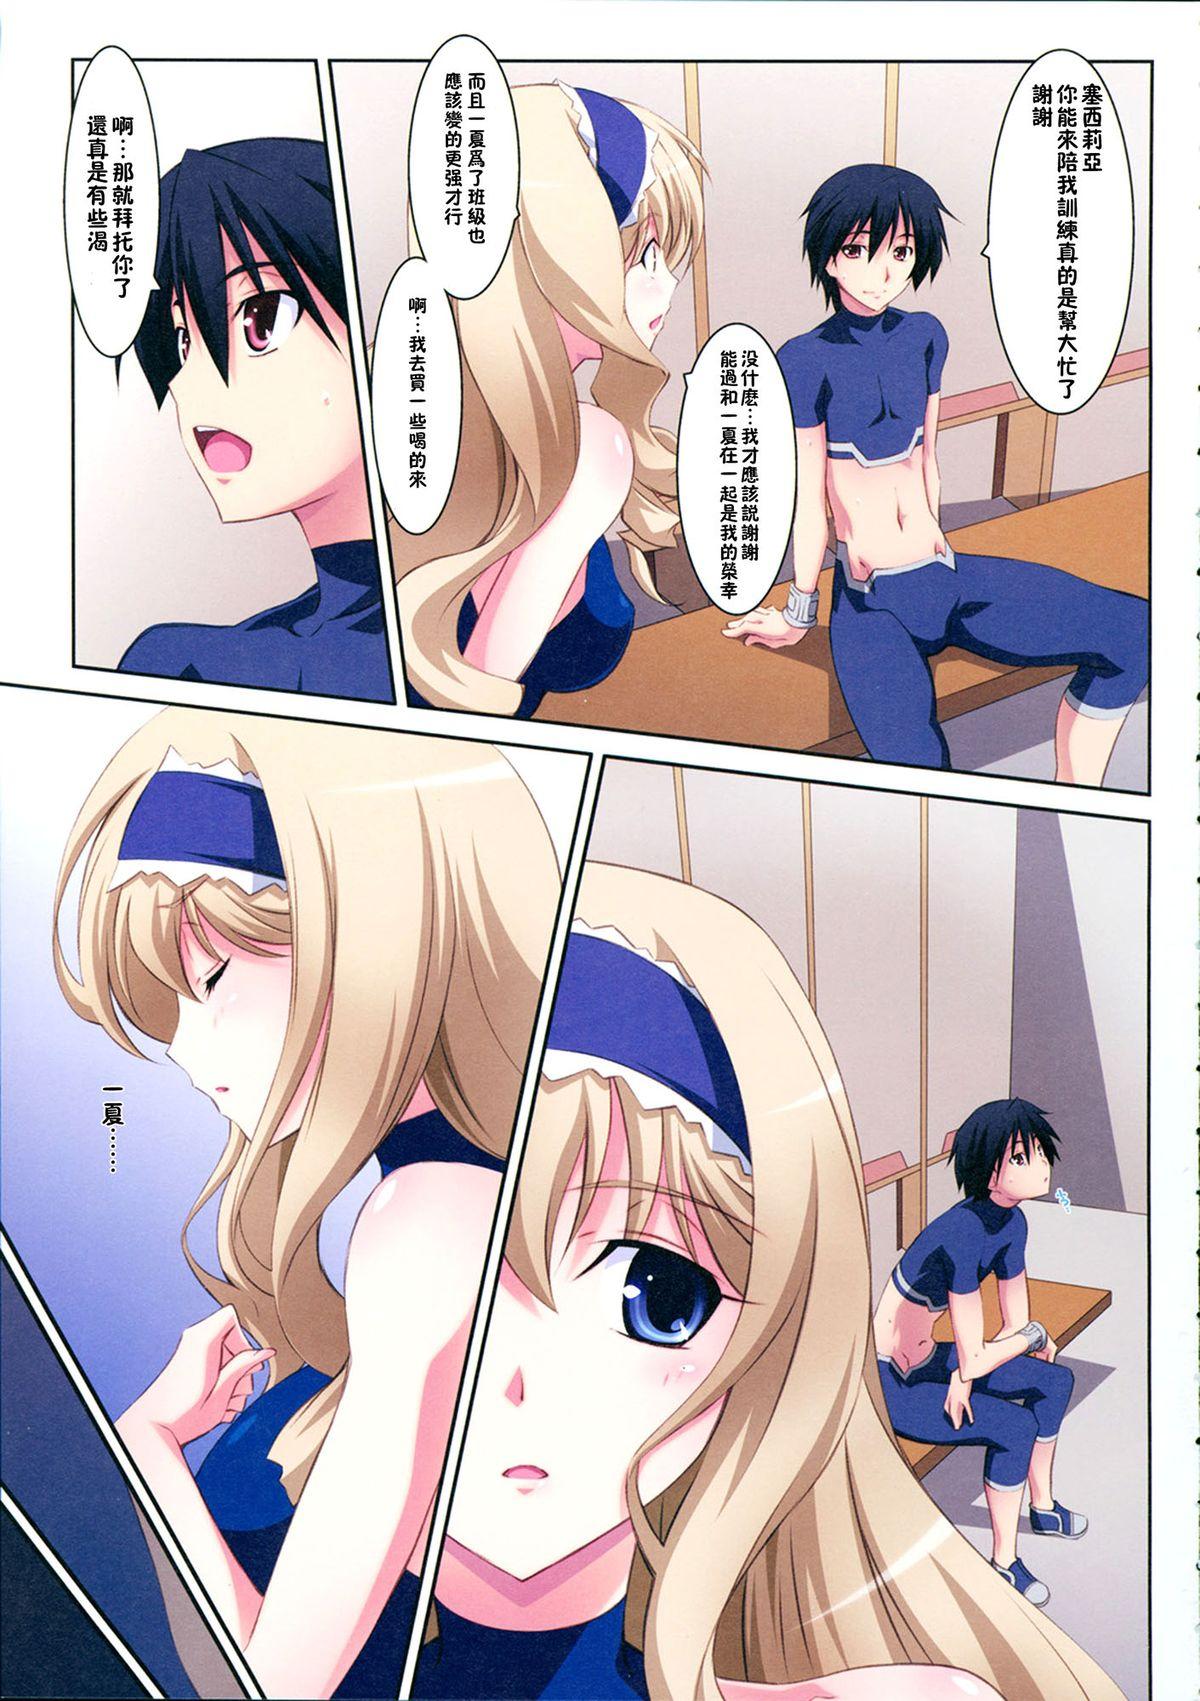 Perverted Cecilia Style - Infinite stratos Live - Page 6